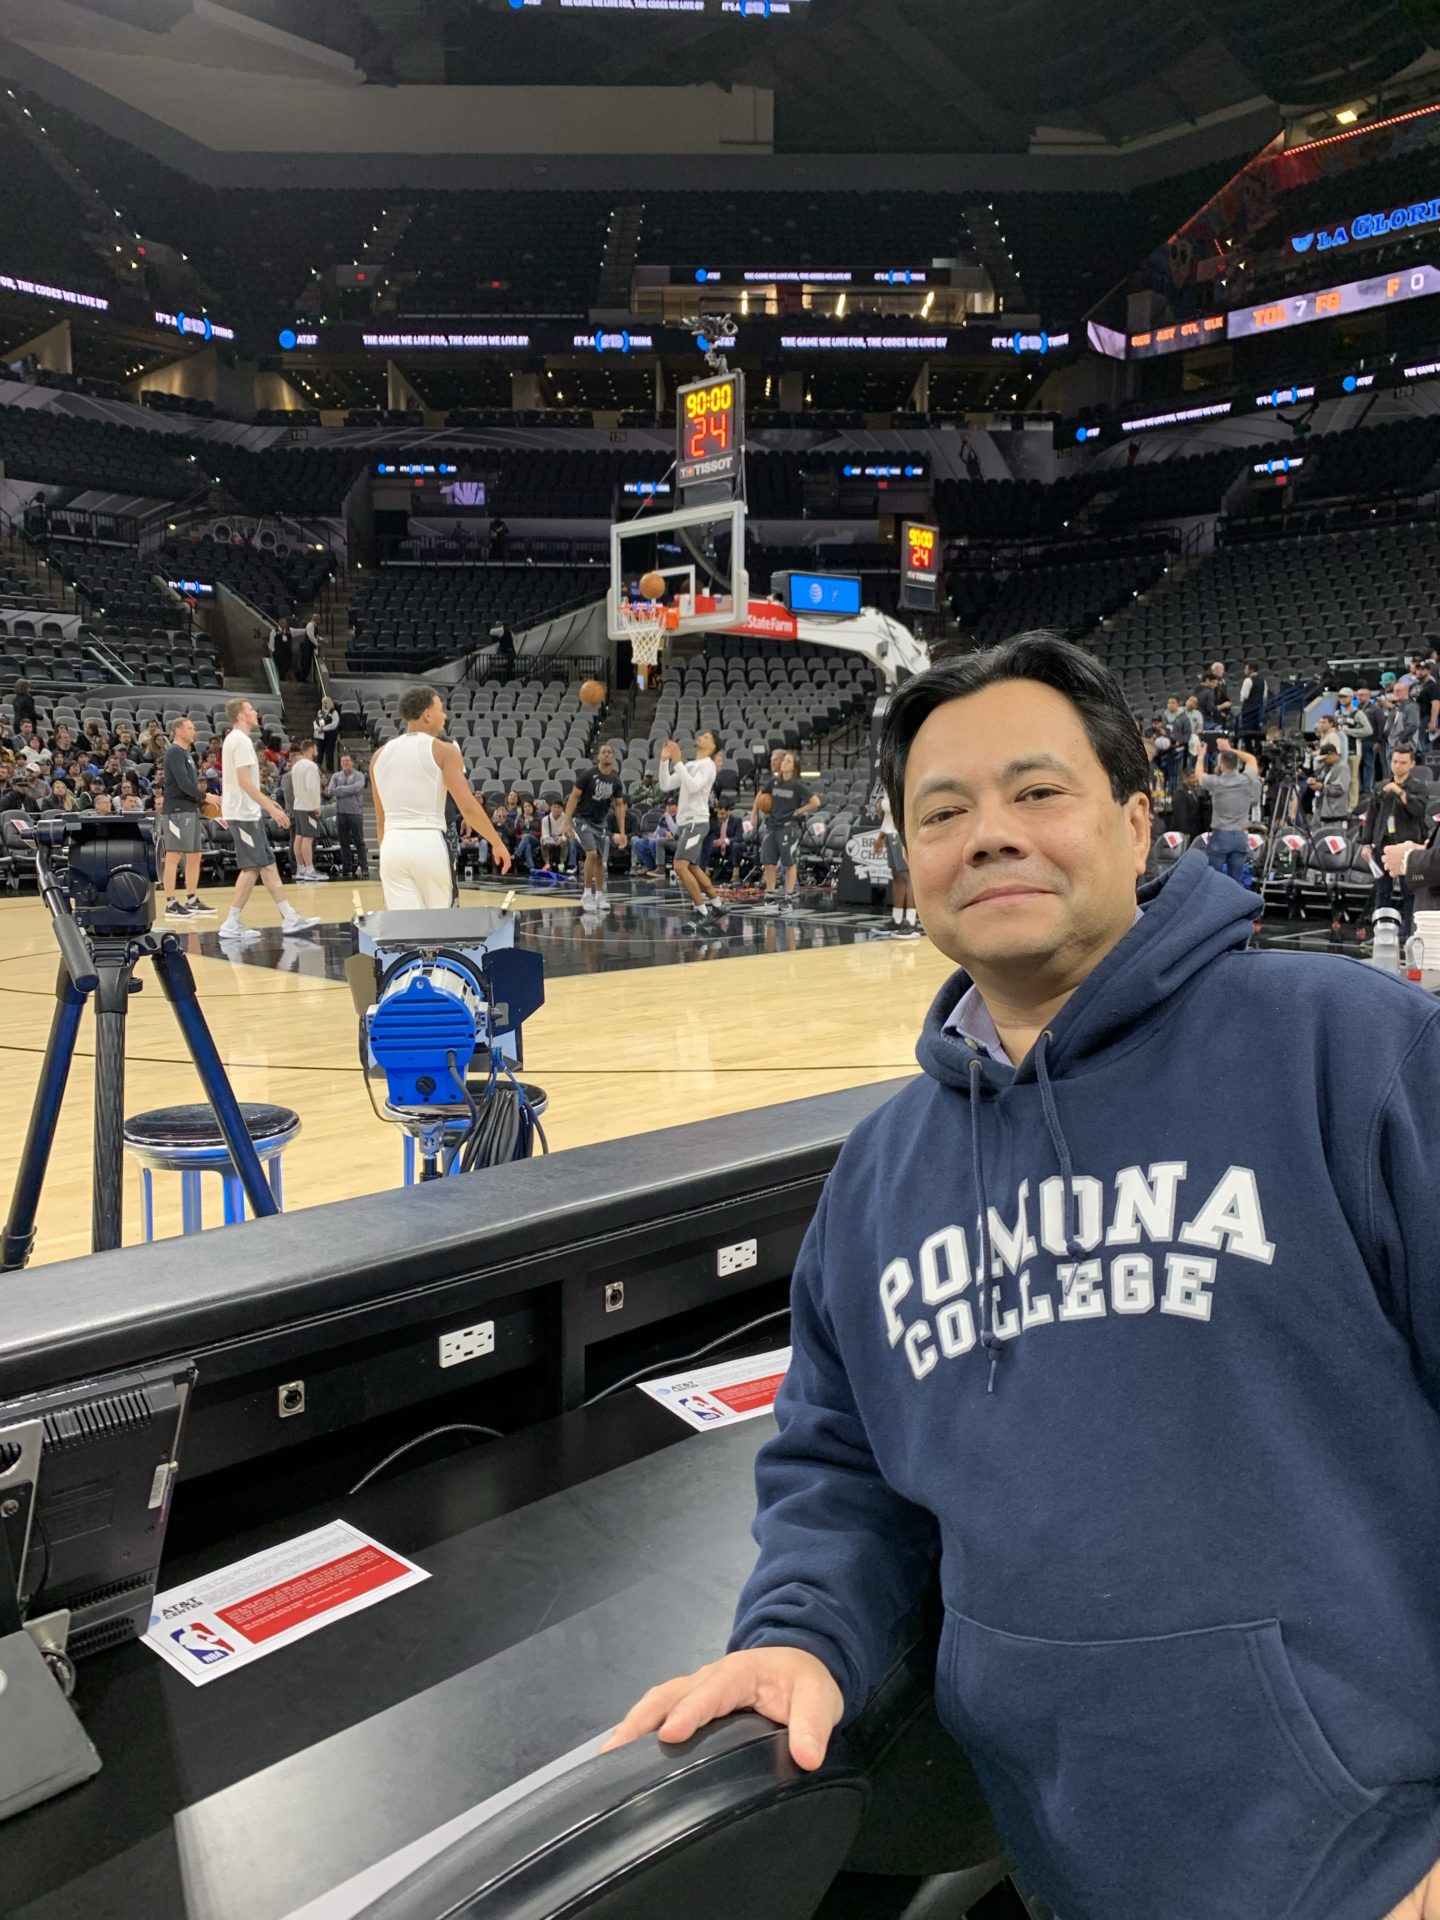 United Airlines frequent flyer Peter Sasaki at a basketball game